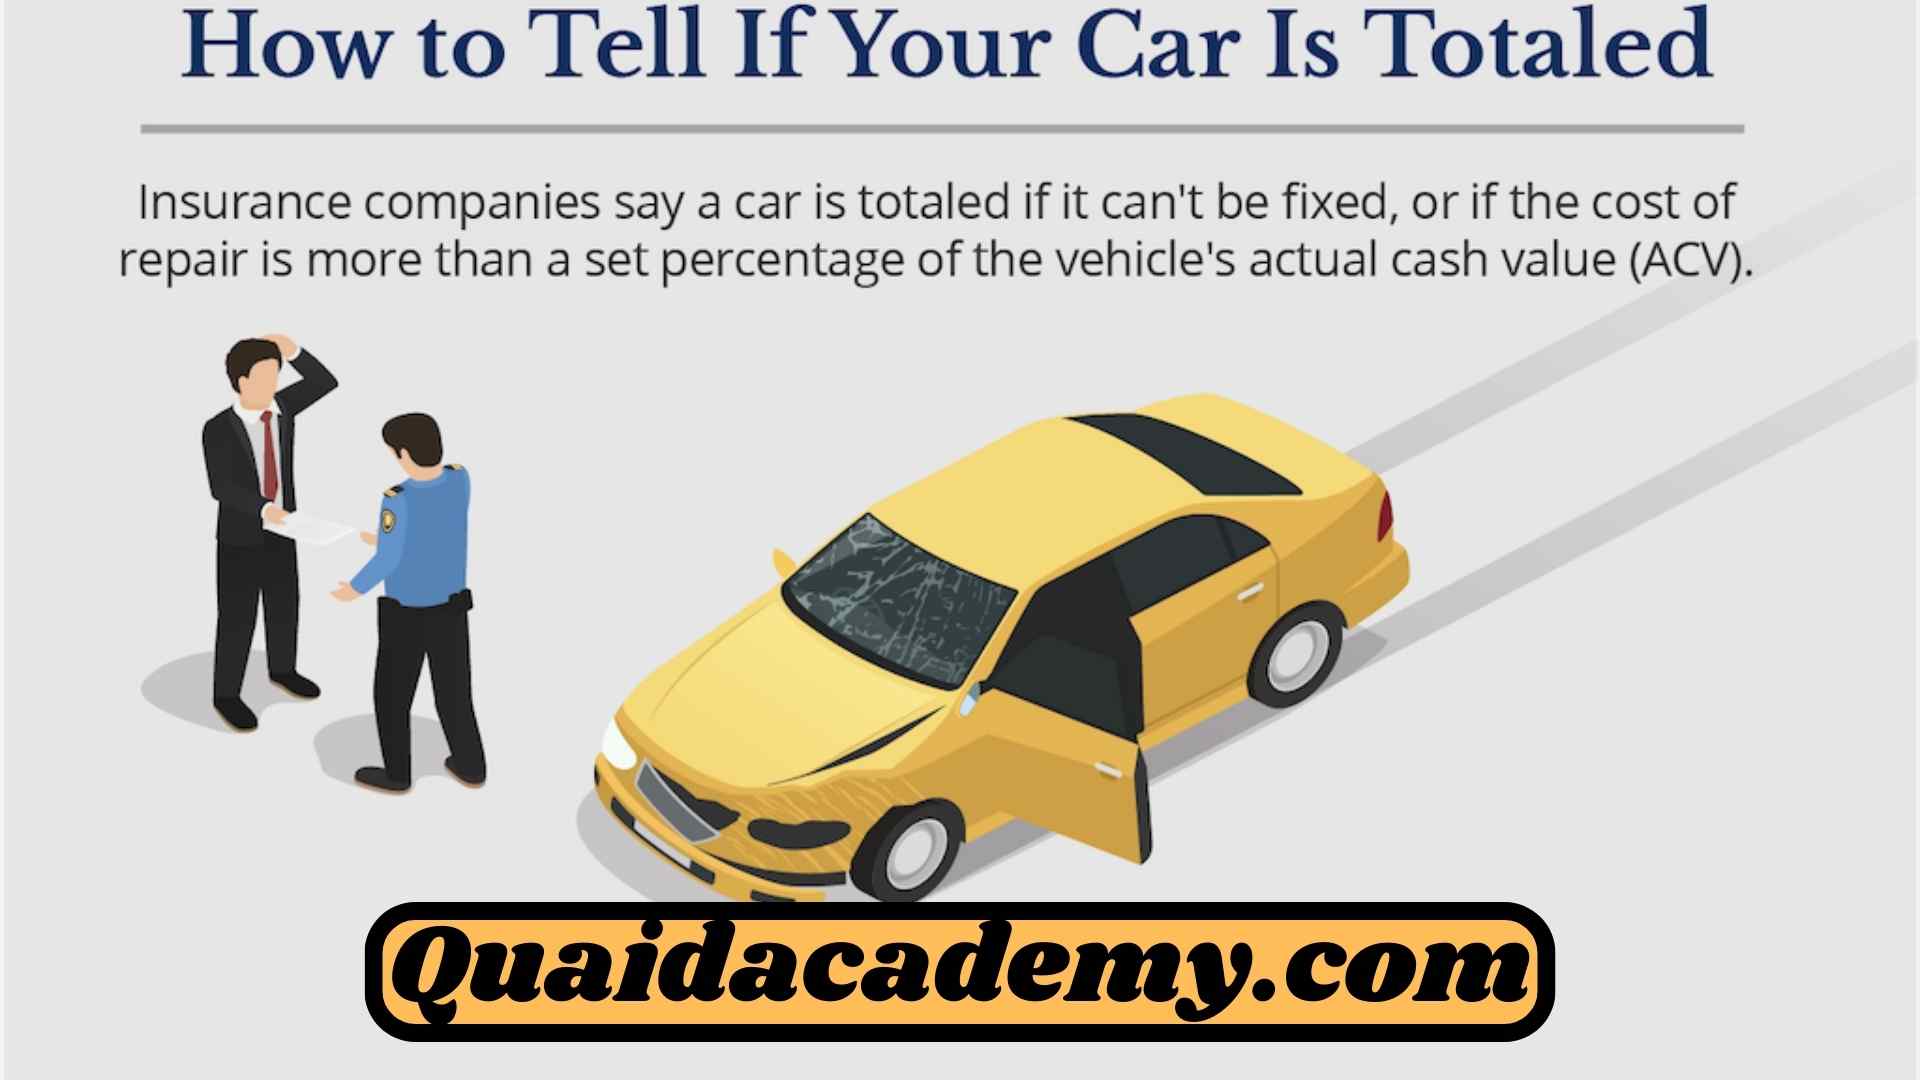 Oklahoma Auto Insurance: Finding the Right Coverage for You